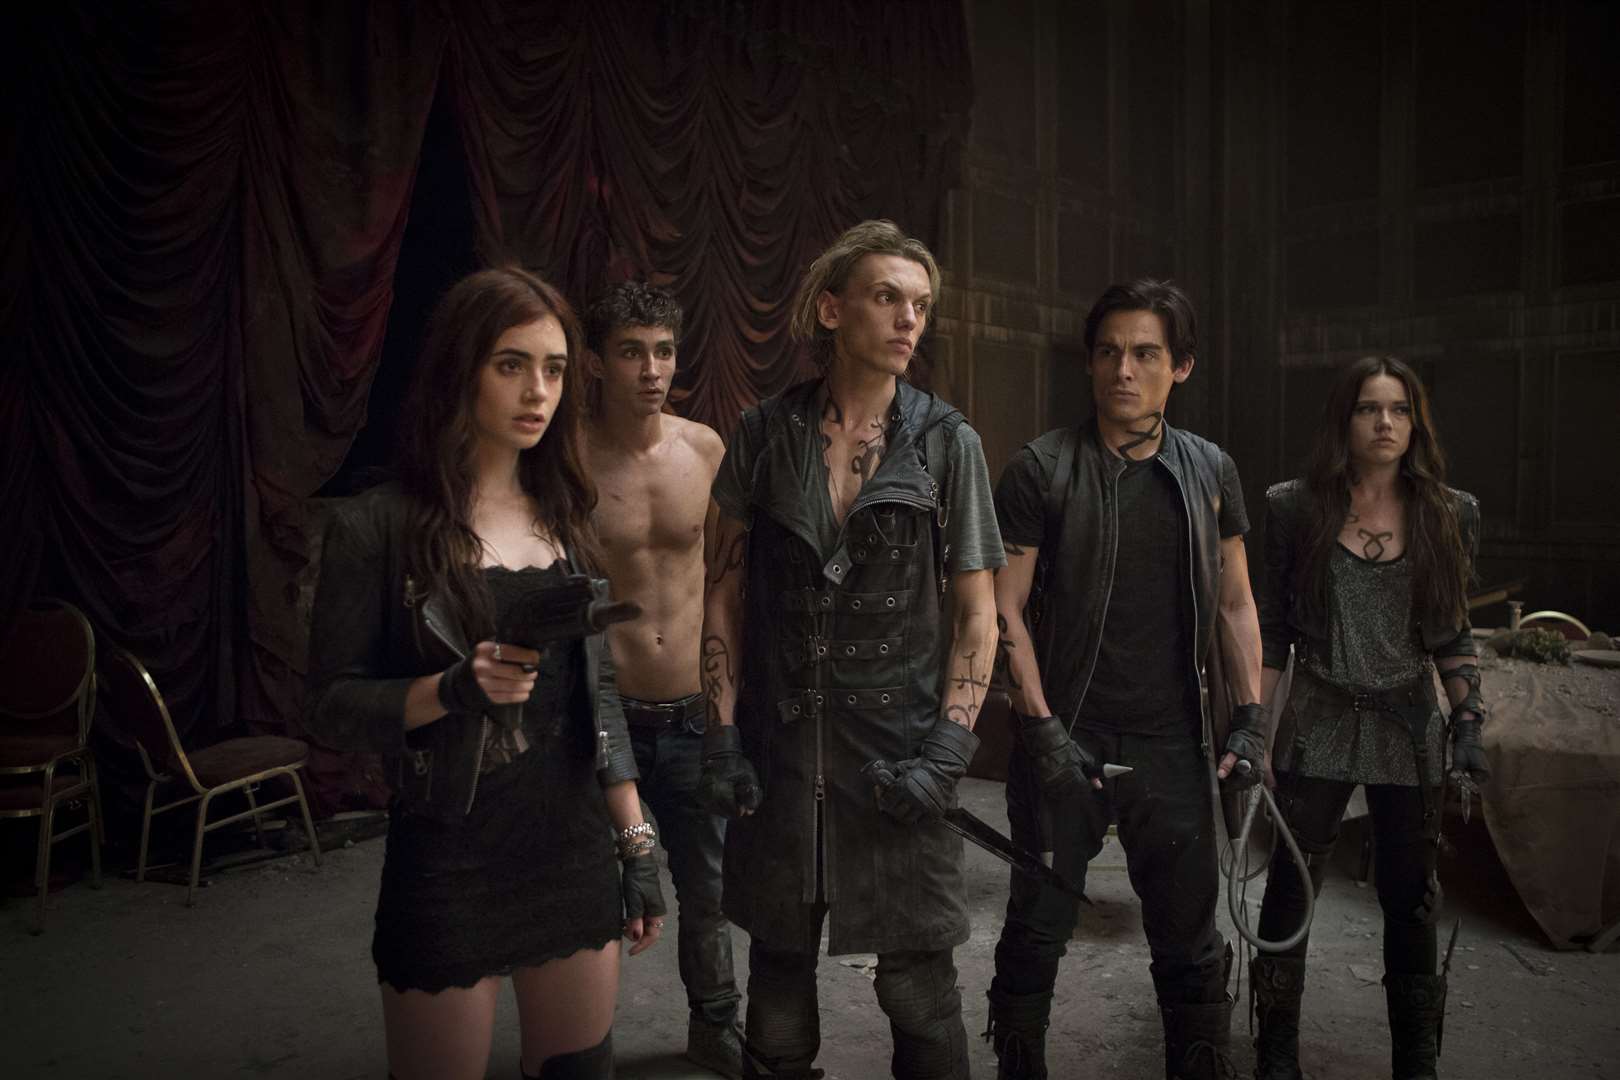 Lily Collins as Clary, Robert Sheehan as Simon, Jamie Campbell Bower as Jace, Kevin Zegers as Alec and Jemima West as Isabelle in The Moral Instruments: City Of Bones. Picture: PA Photo/Entertainment One.